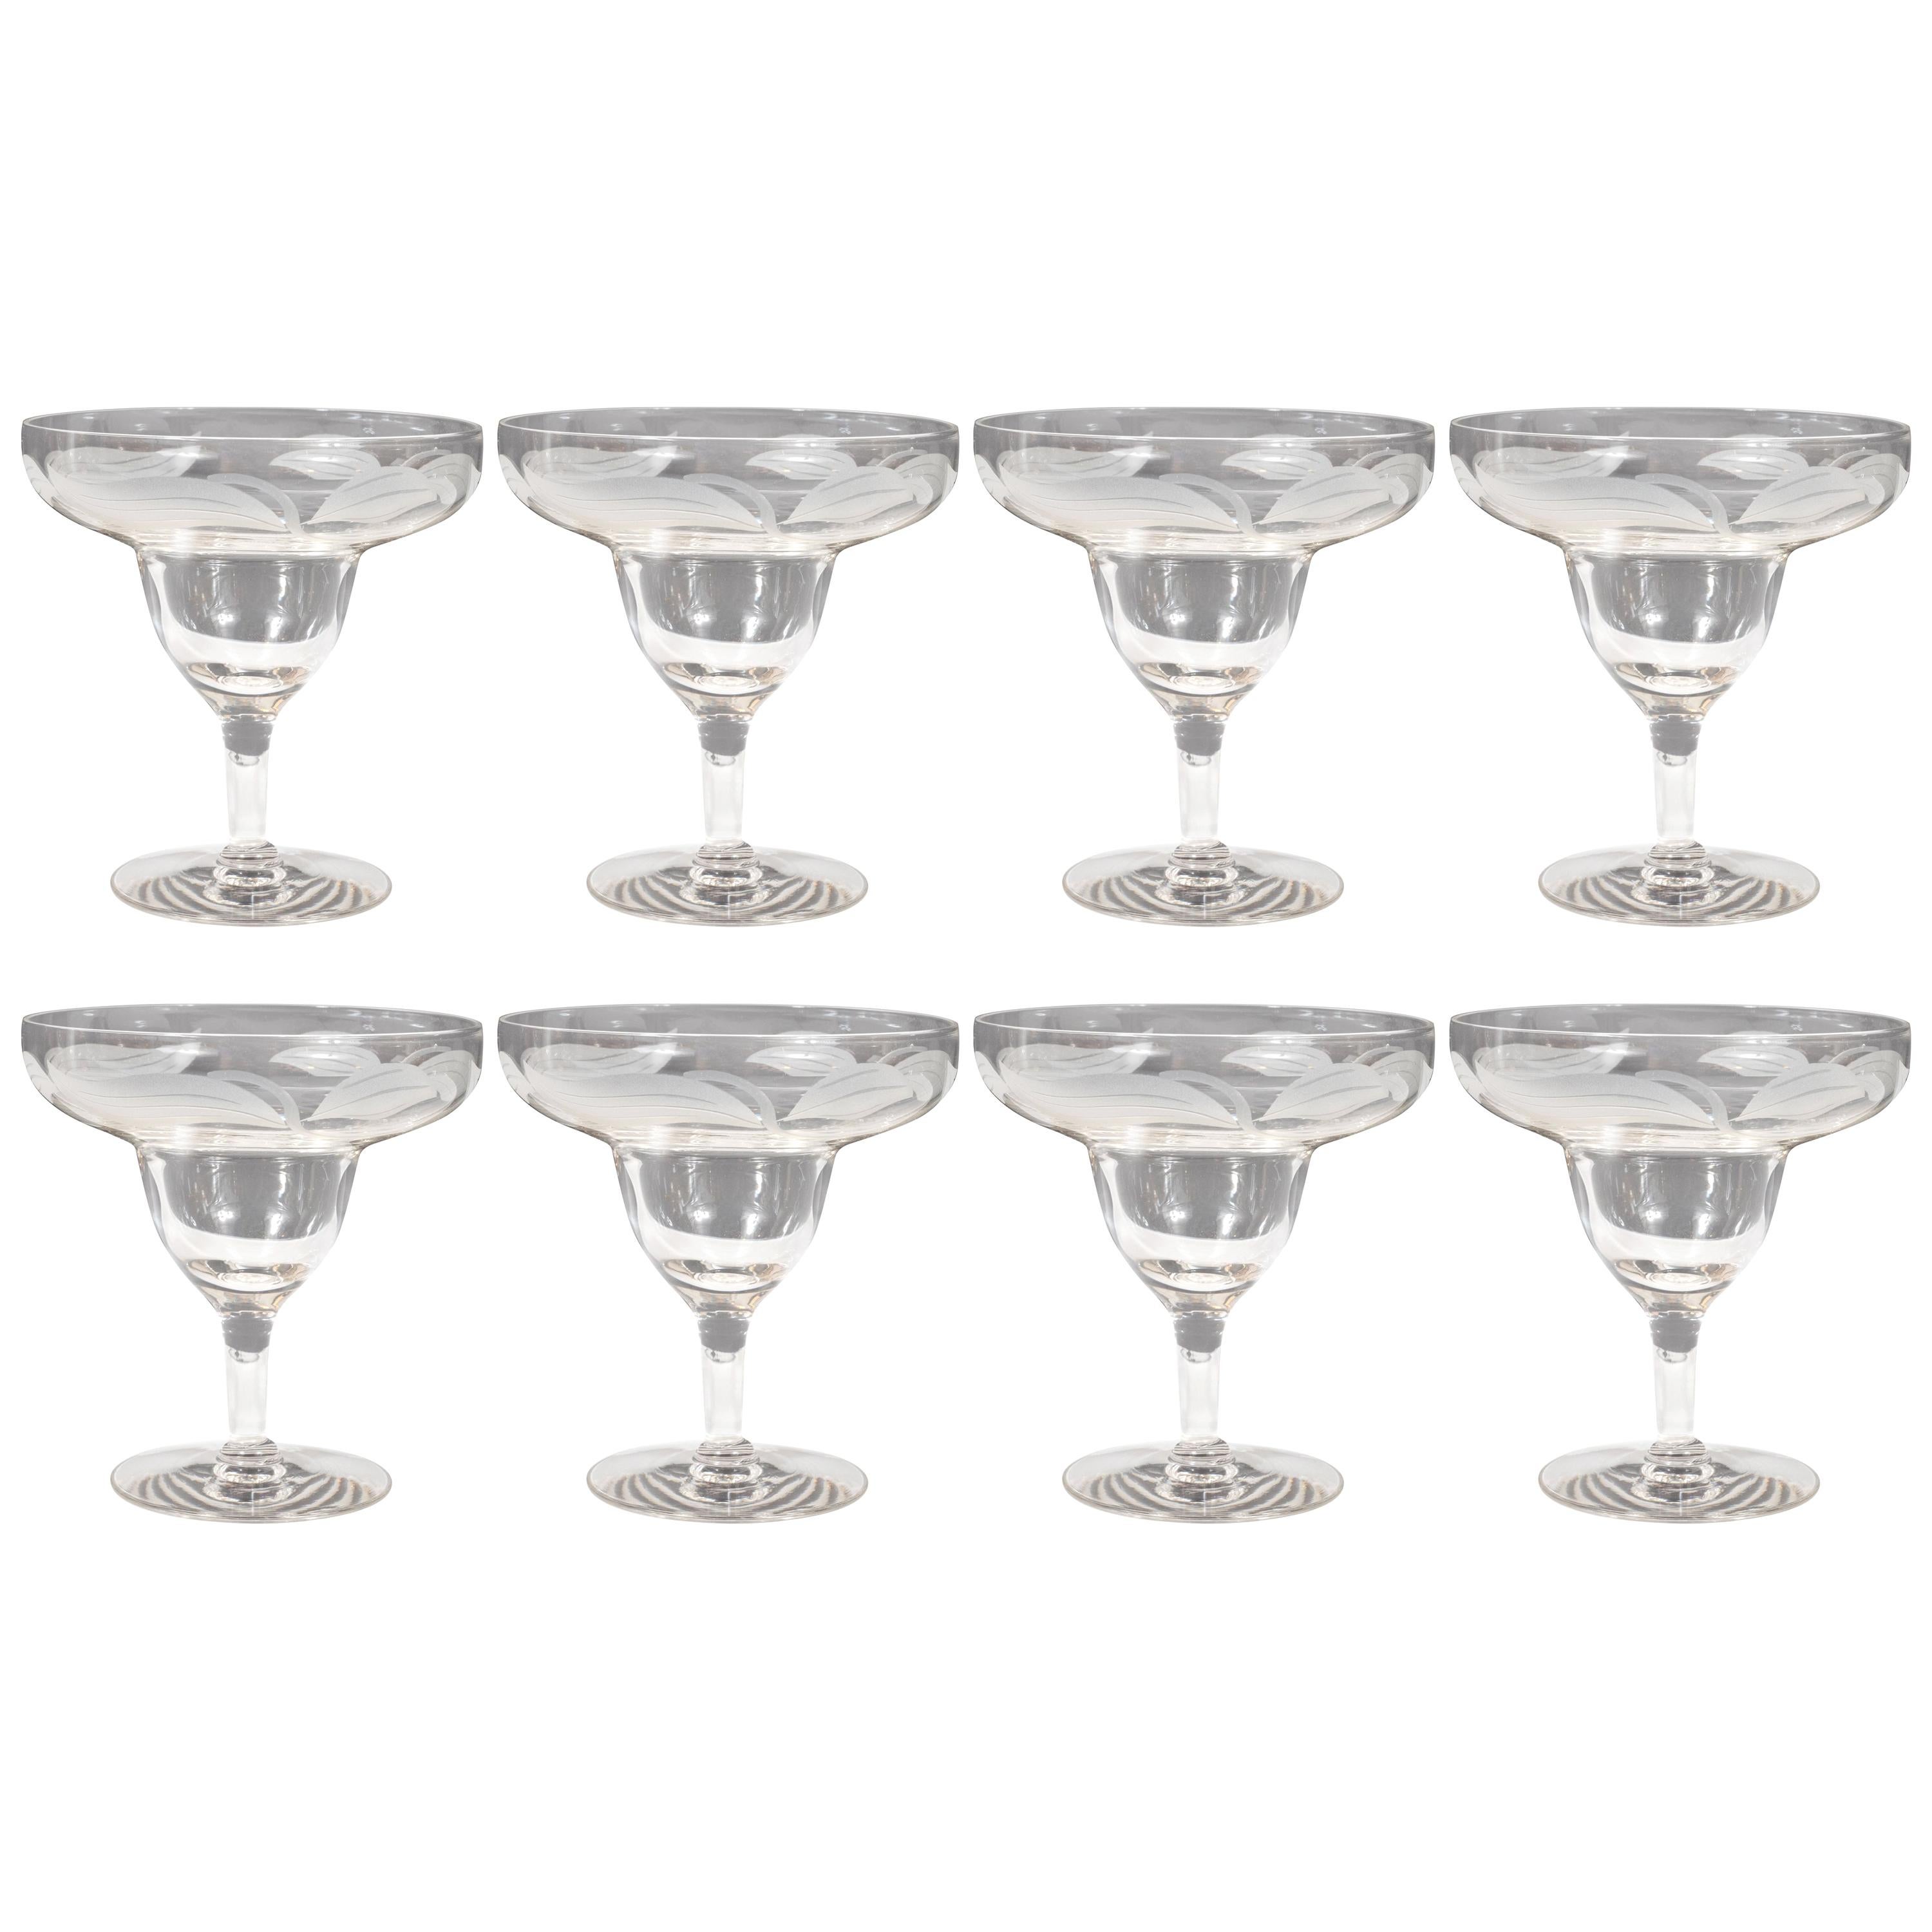 Art Deco Translucent Footed Glass Dessert Bowls with Frosted Foliate Detailing